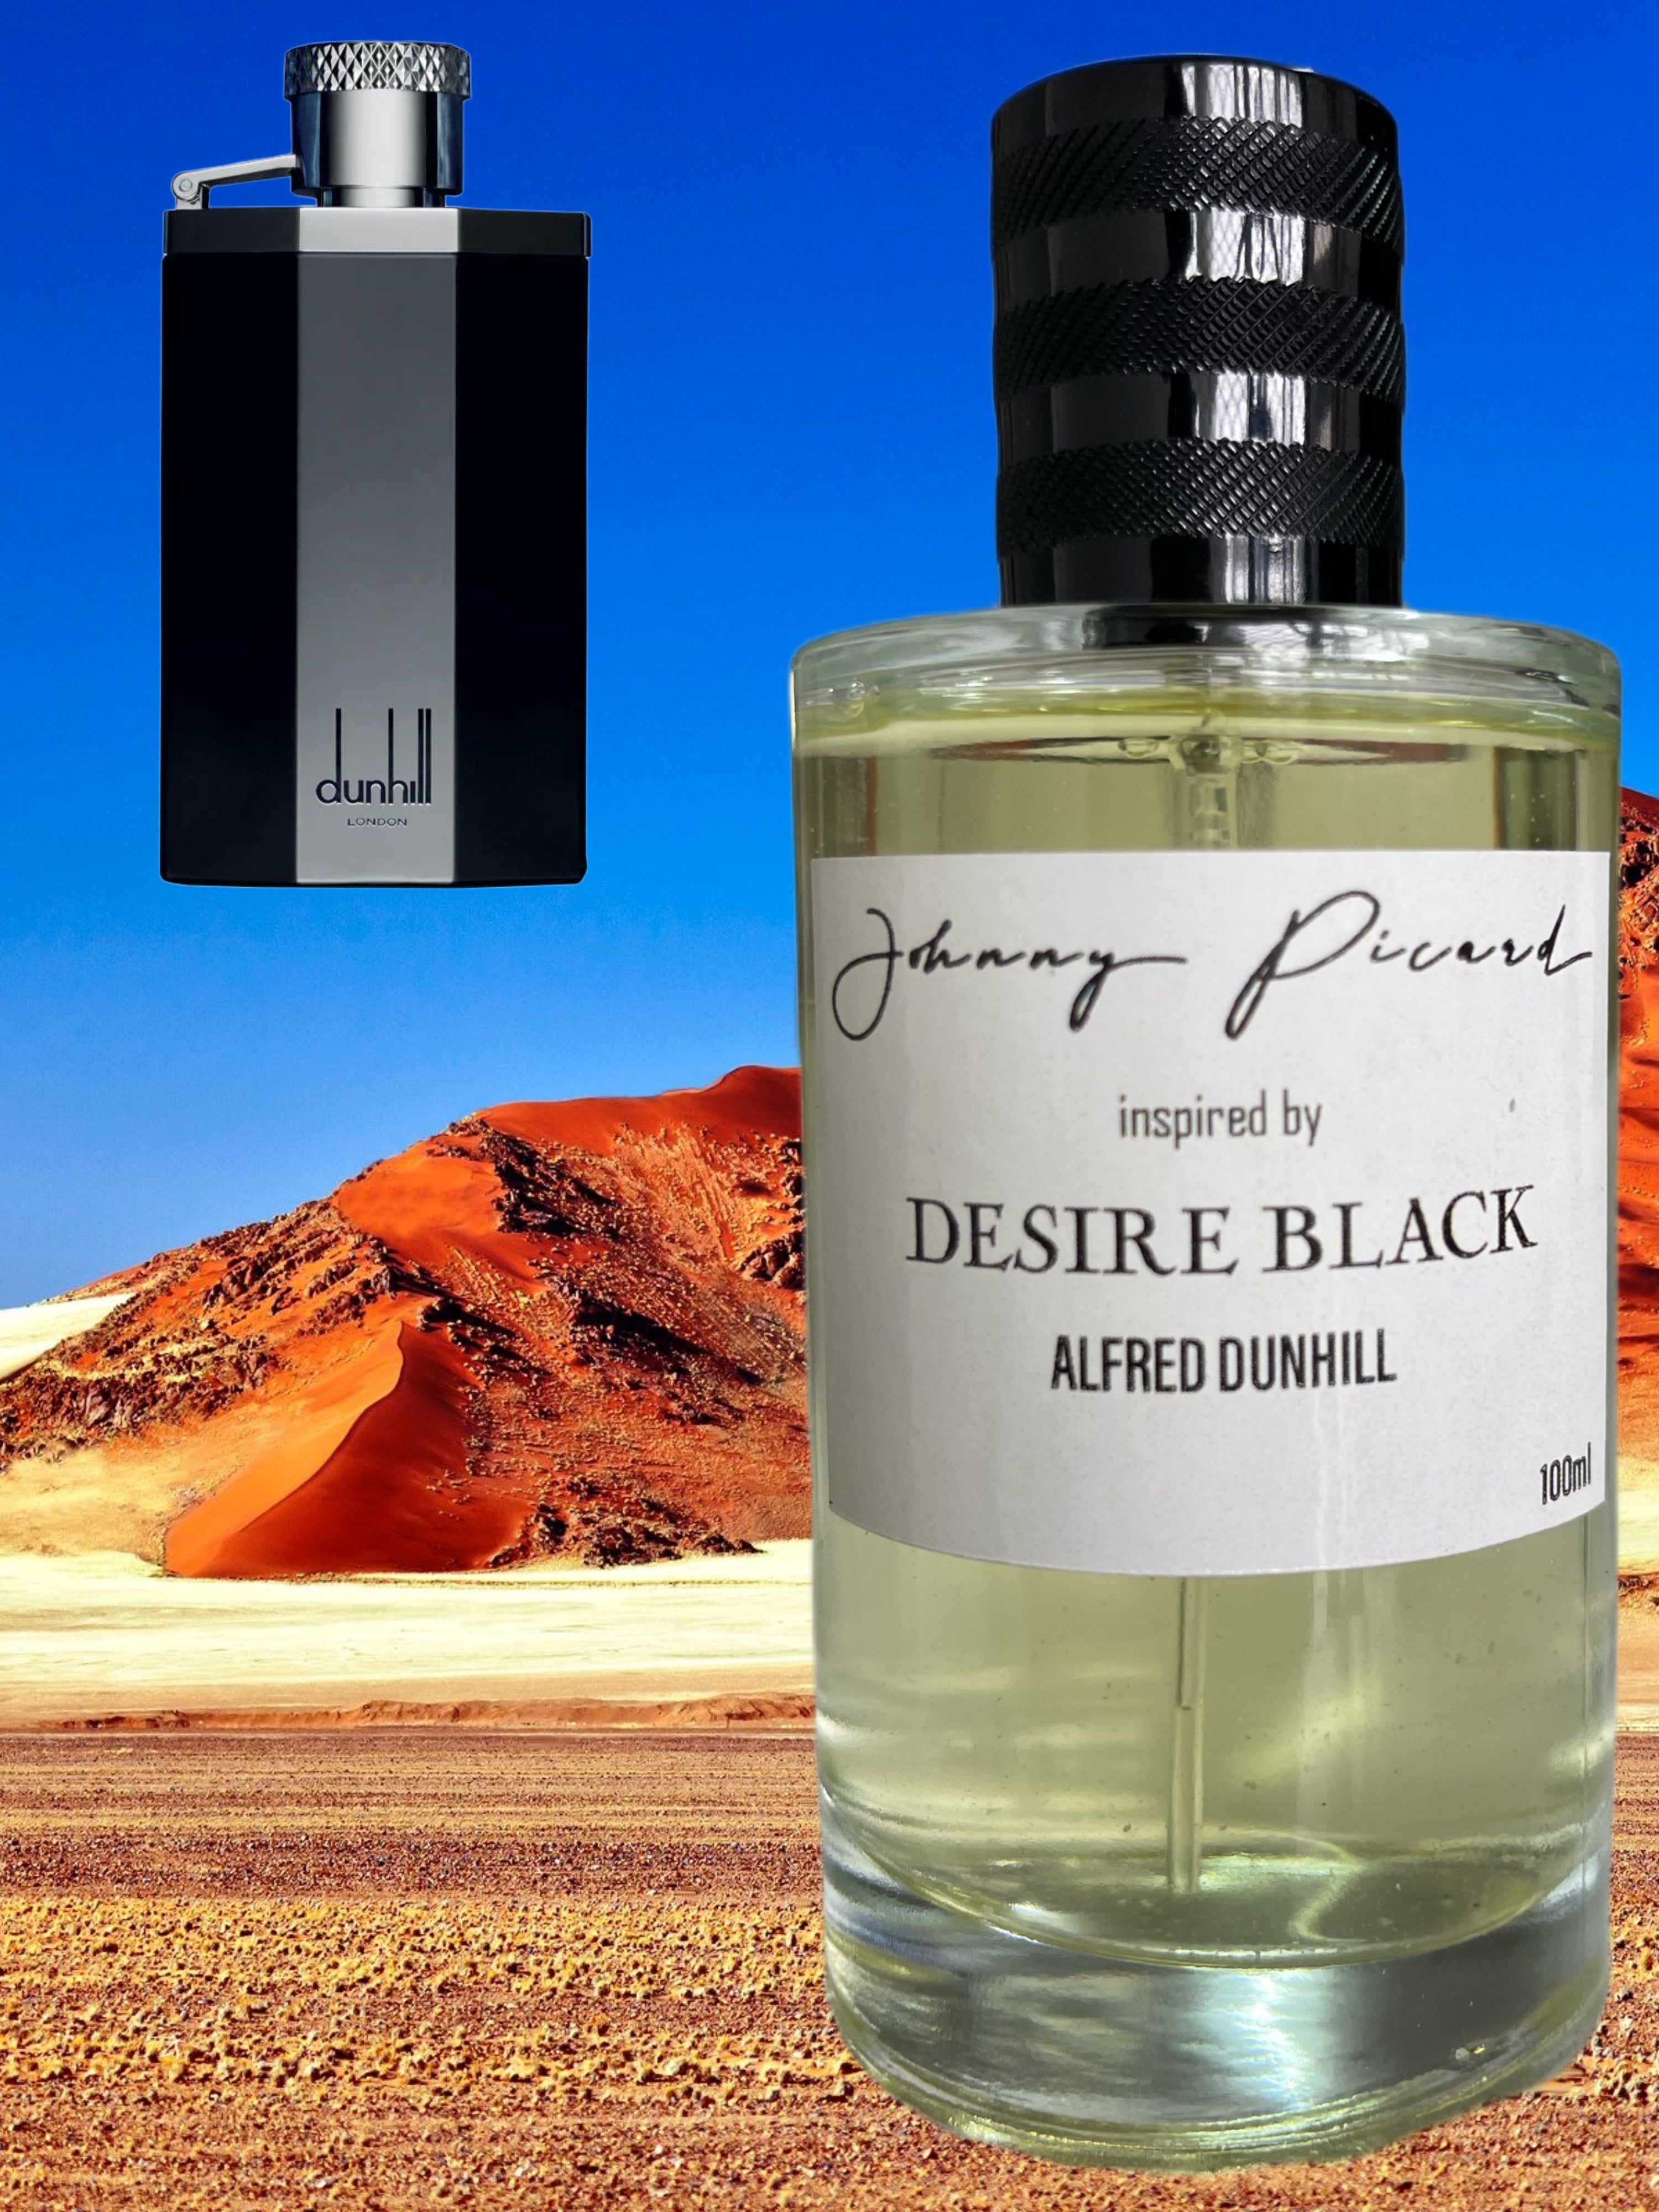 Johnny picard inspired by Desire Black  ALFRED DUNHILL